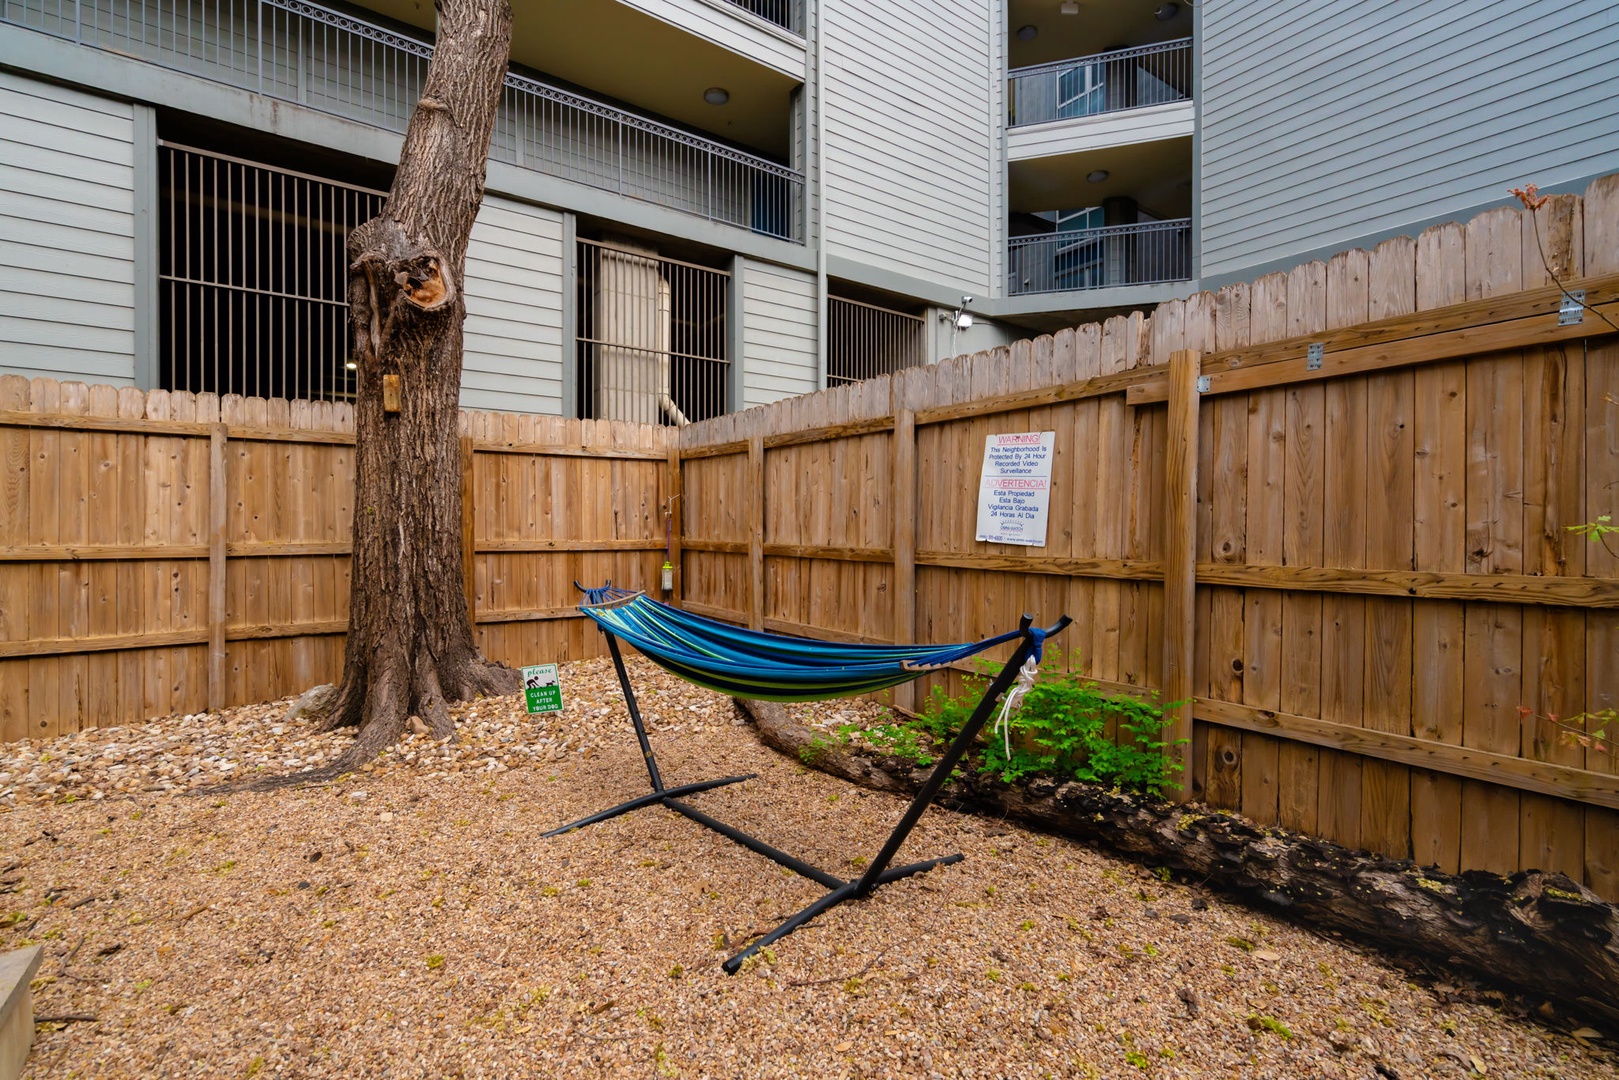 Relax in the fresh air or dine alfresco in the shared back yard space